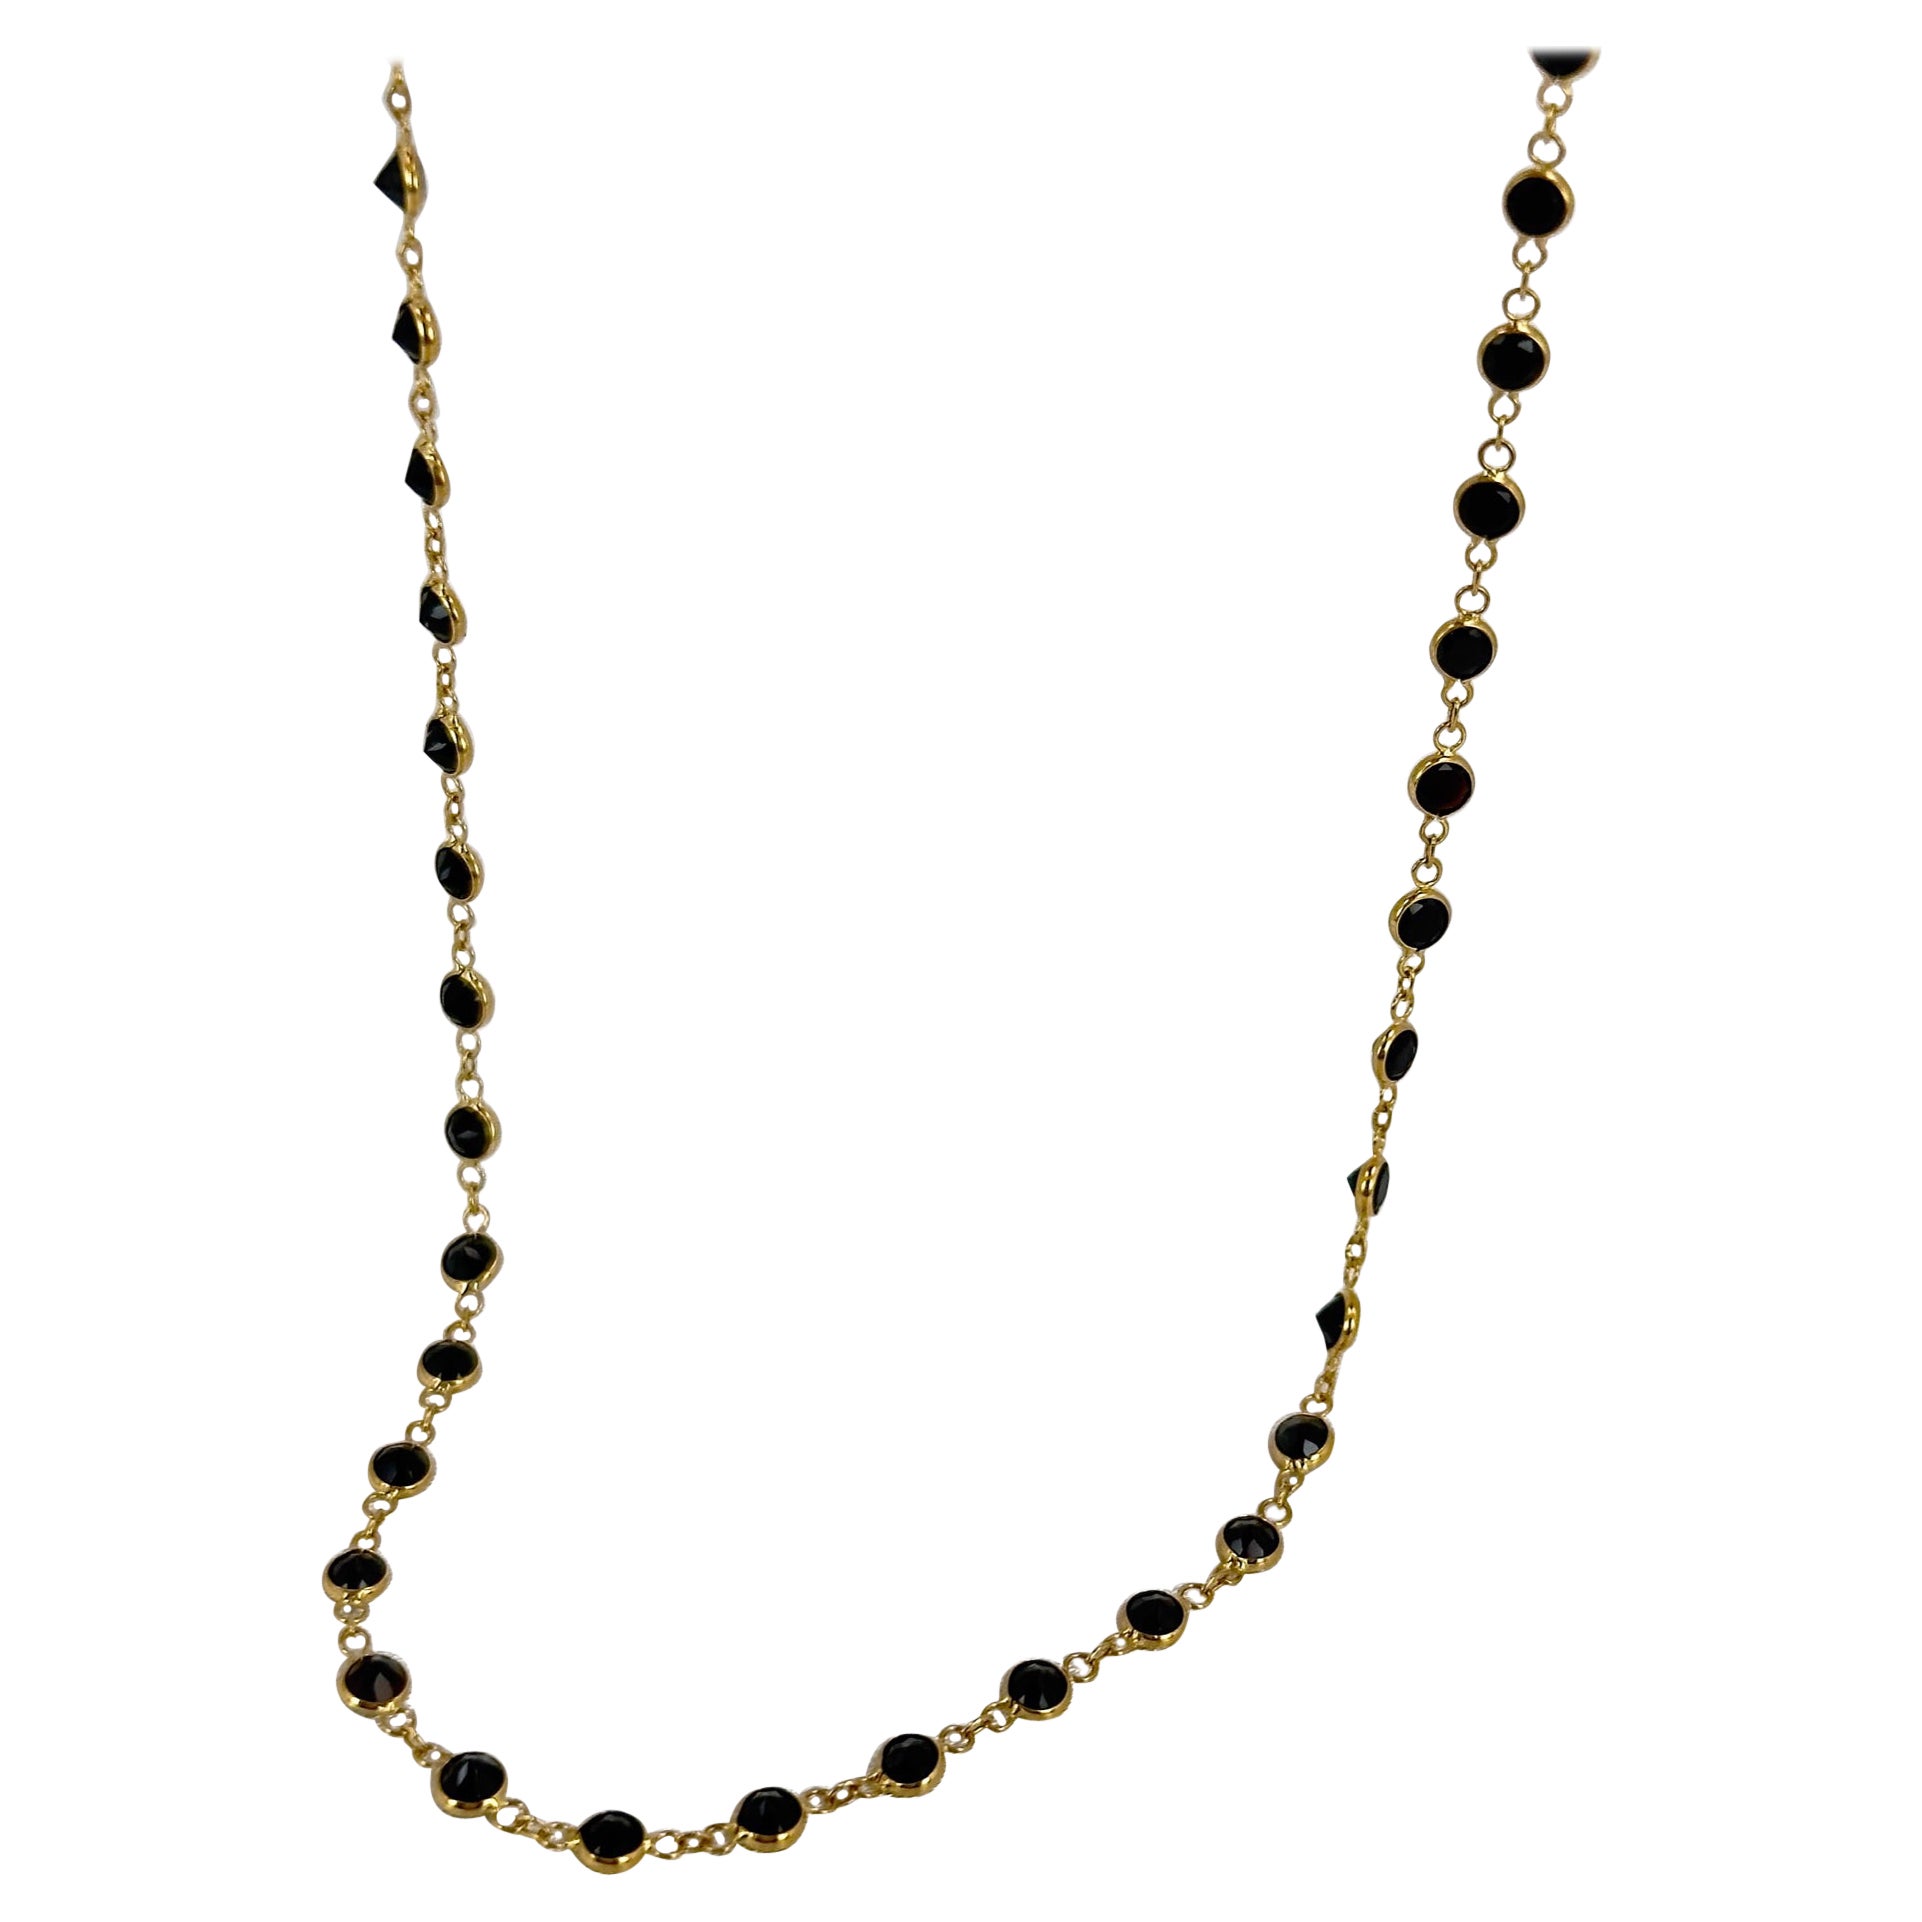 Our newest addition to the bezel set jewelry! The Black Spinel Necklace set in 18k solid Yellow gold! Beautiful round black Spinel, all in a unified color scheme, are set in the light weight and flexible bezel setting.

 The necklace is super